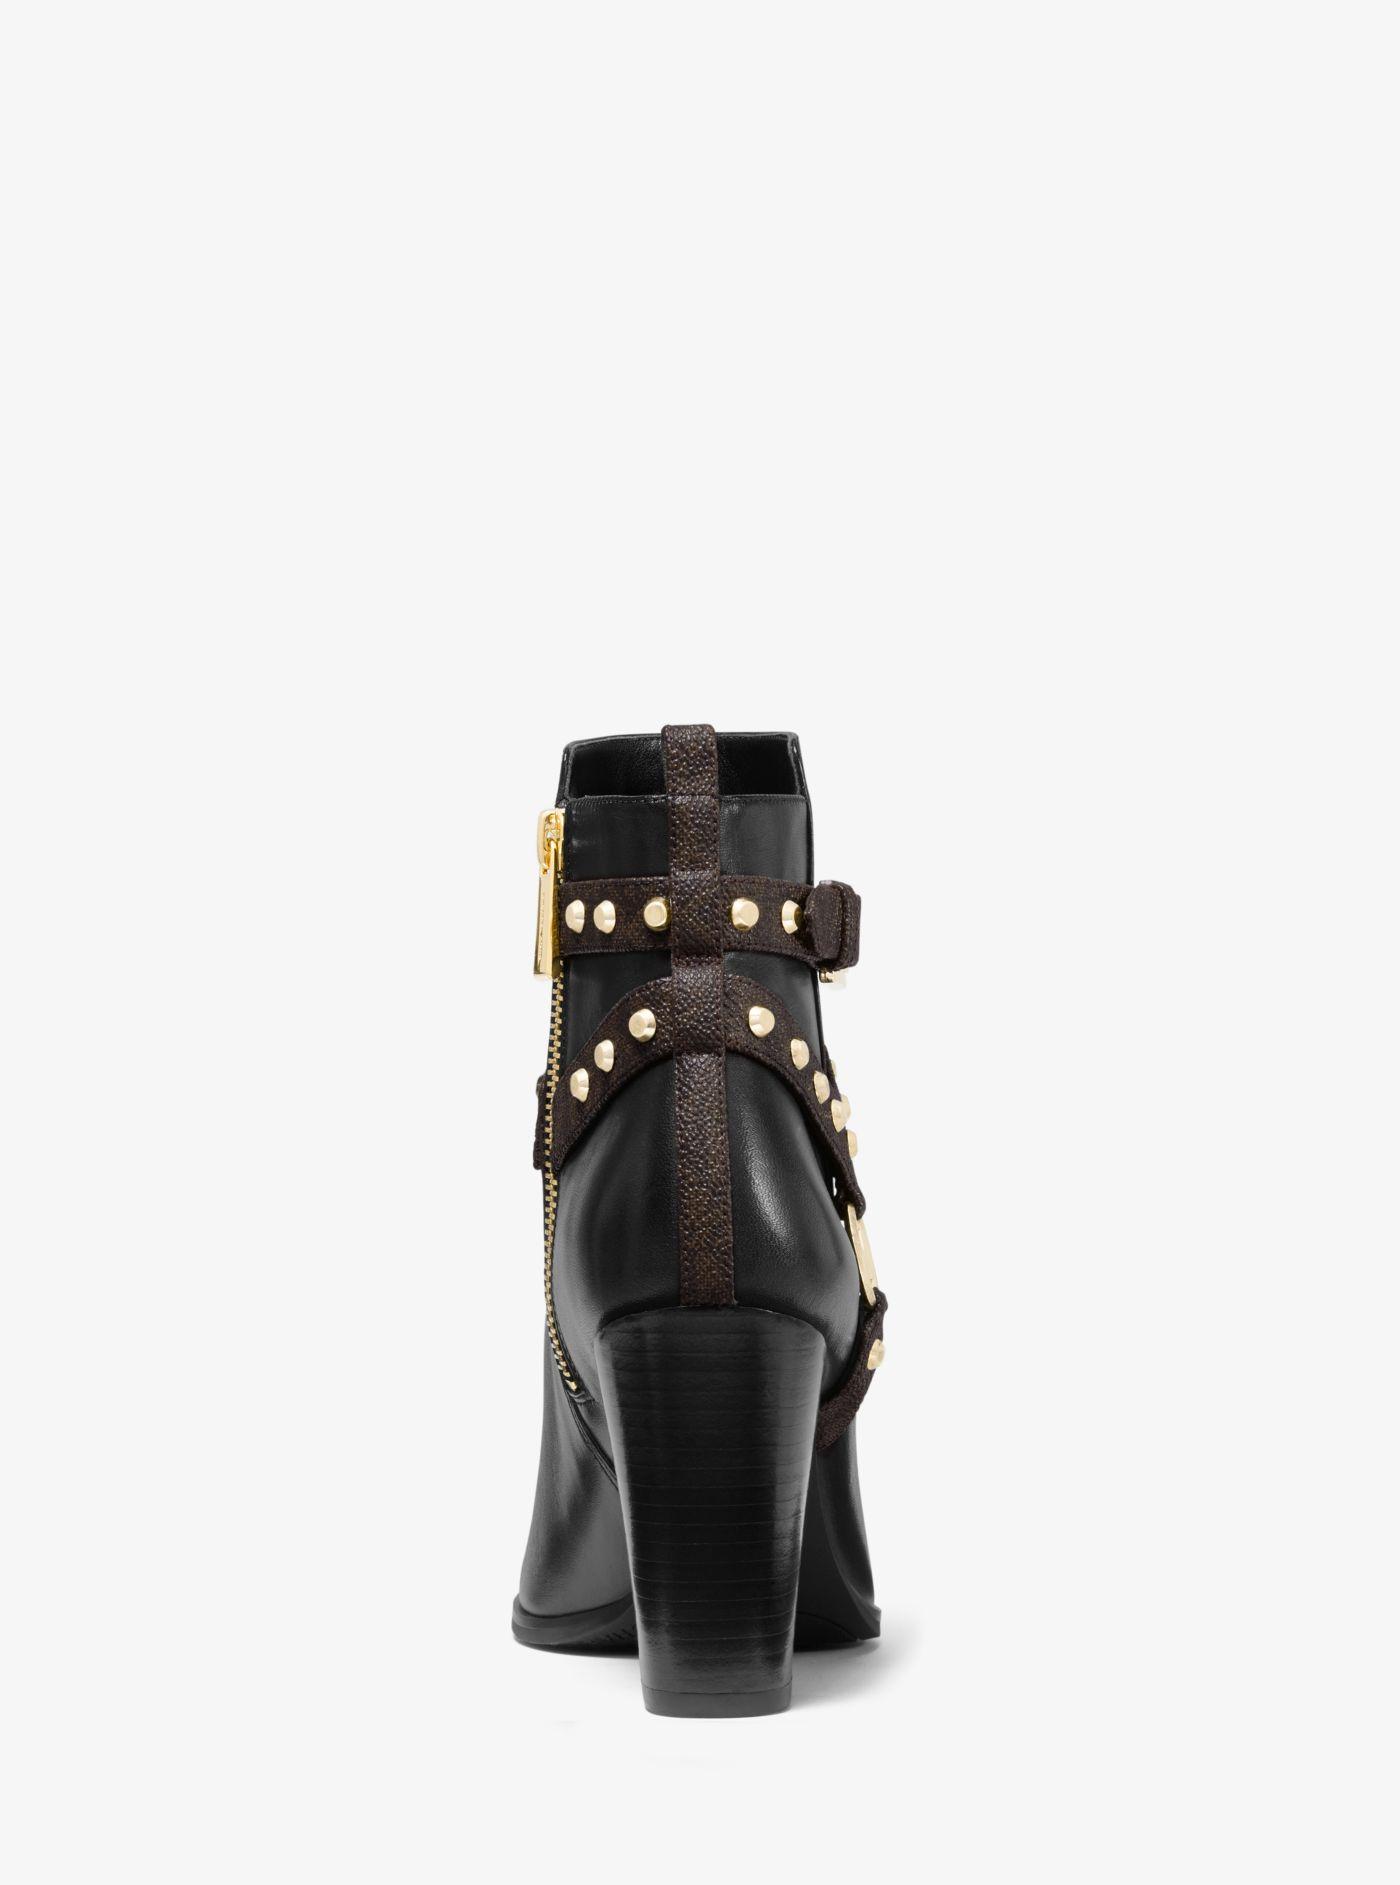 Michael Kors Preston Studded Leather Ankle Boot in Black | Lyst